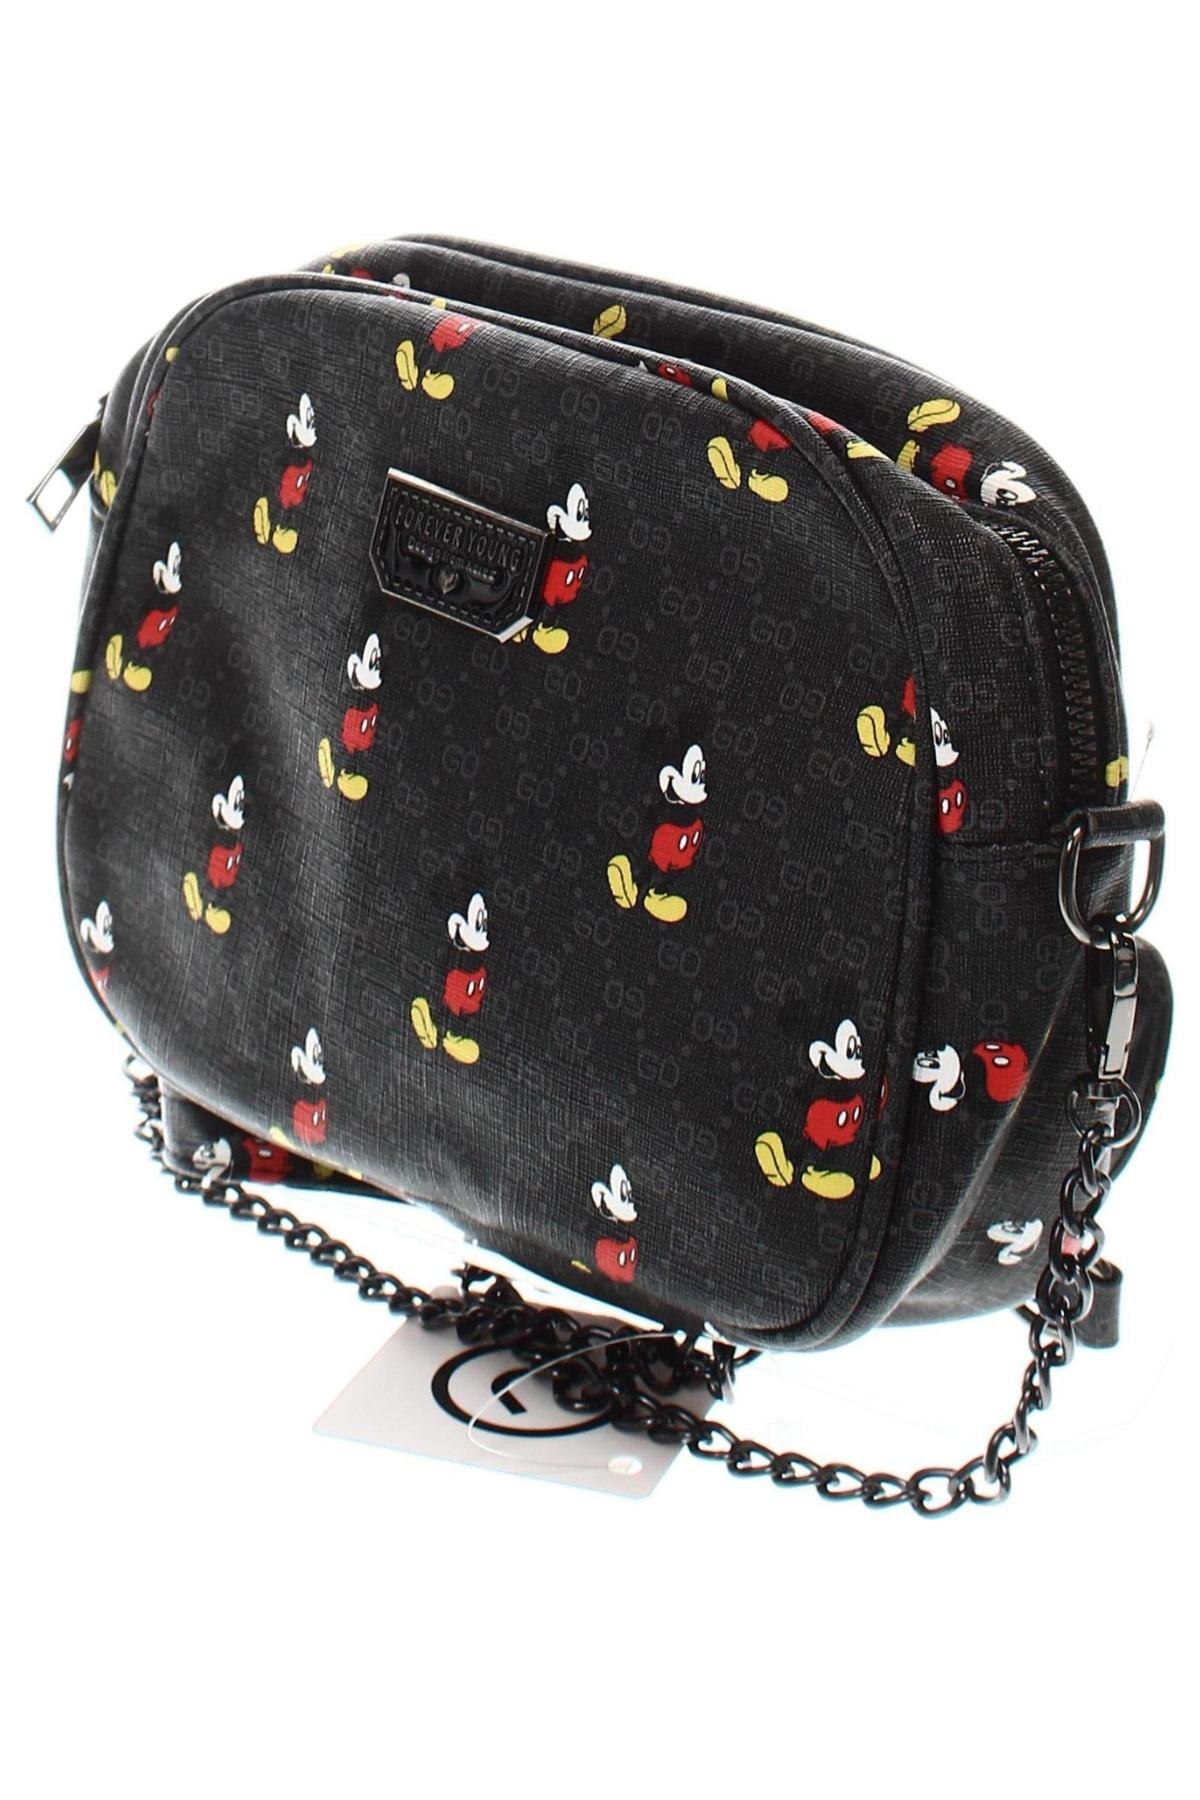 Kindertasche Forever Young by Chicoree, Farbe Schwarz, Preis 11,83 €